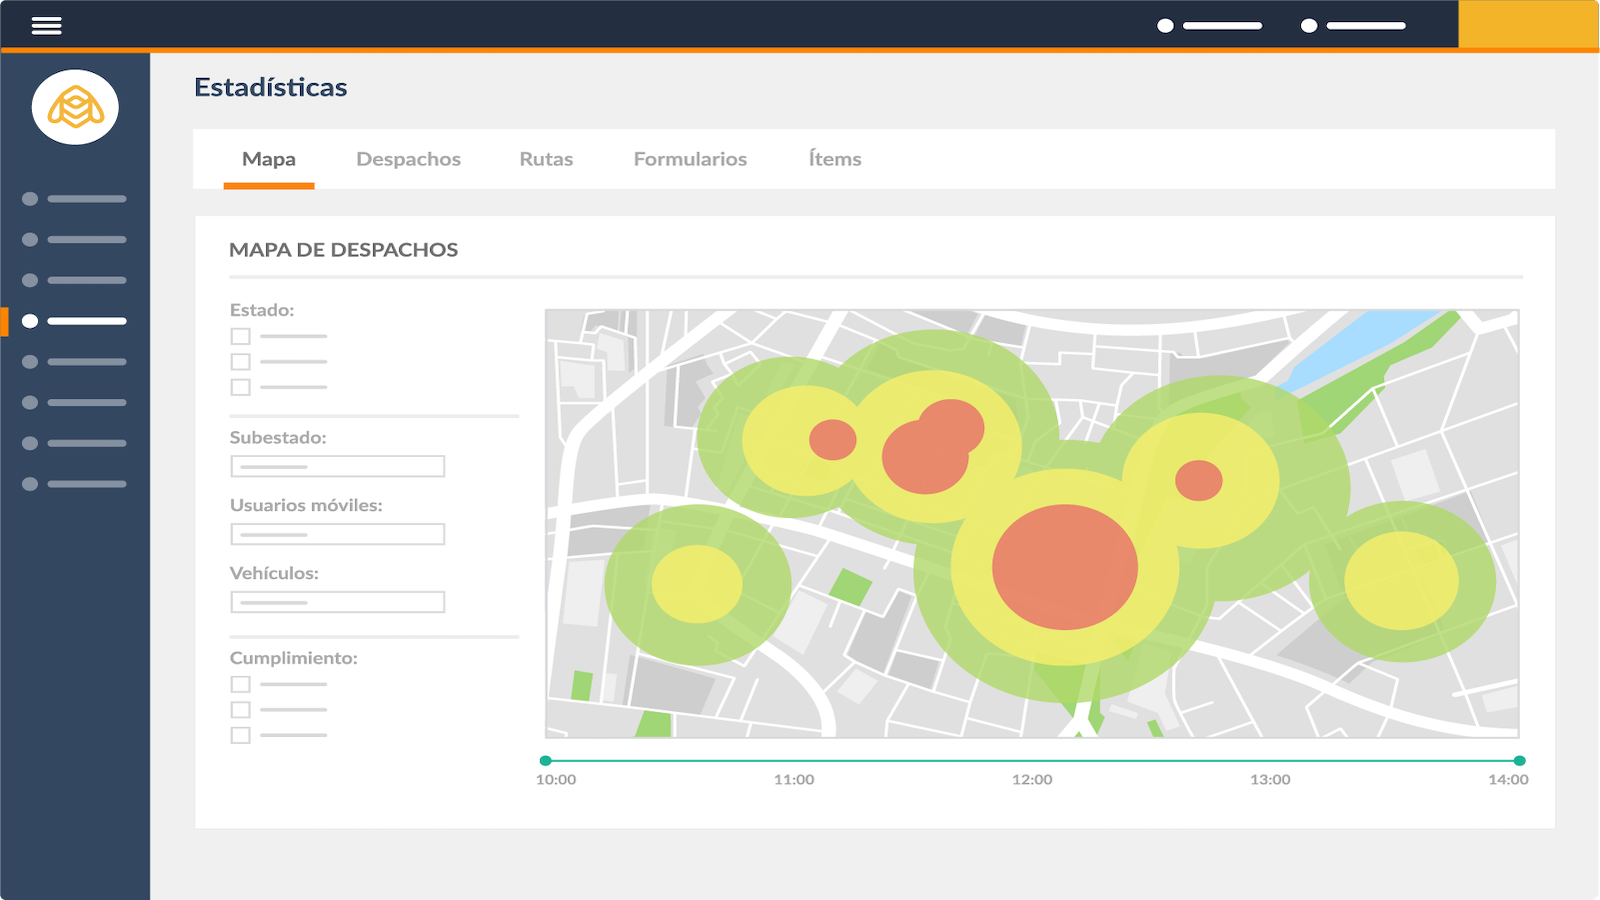 Analyze the volume of your deliveries in the city.